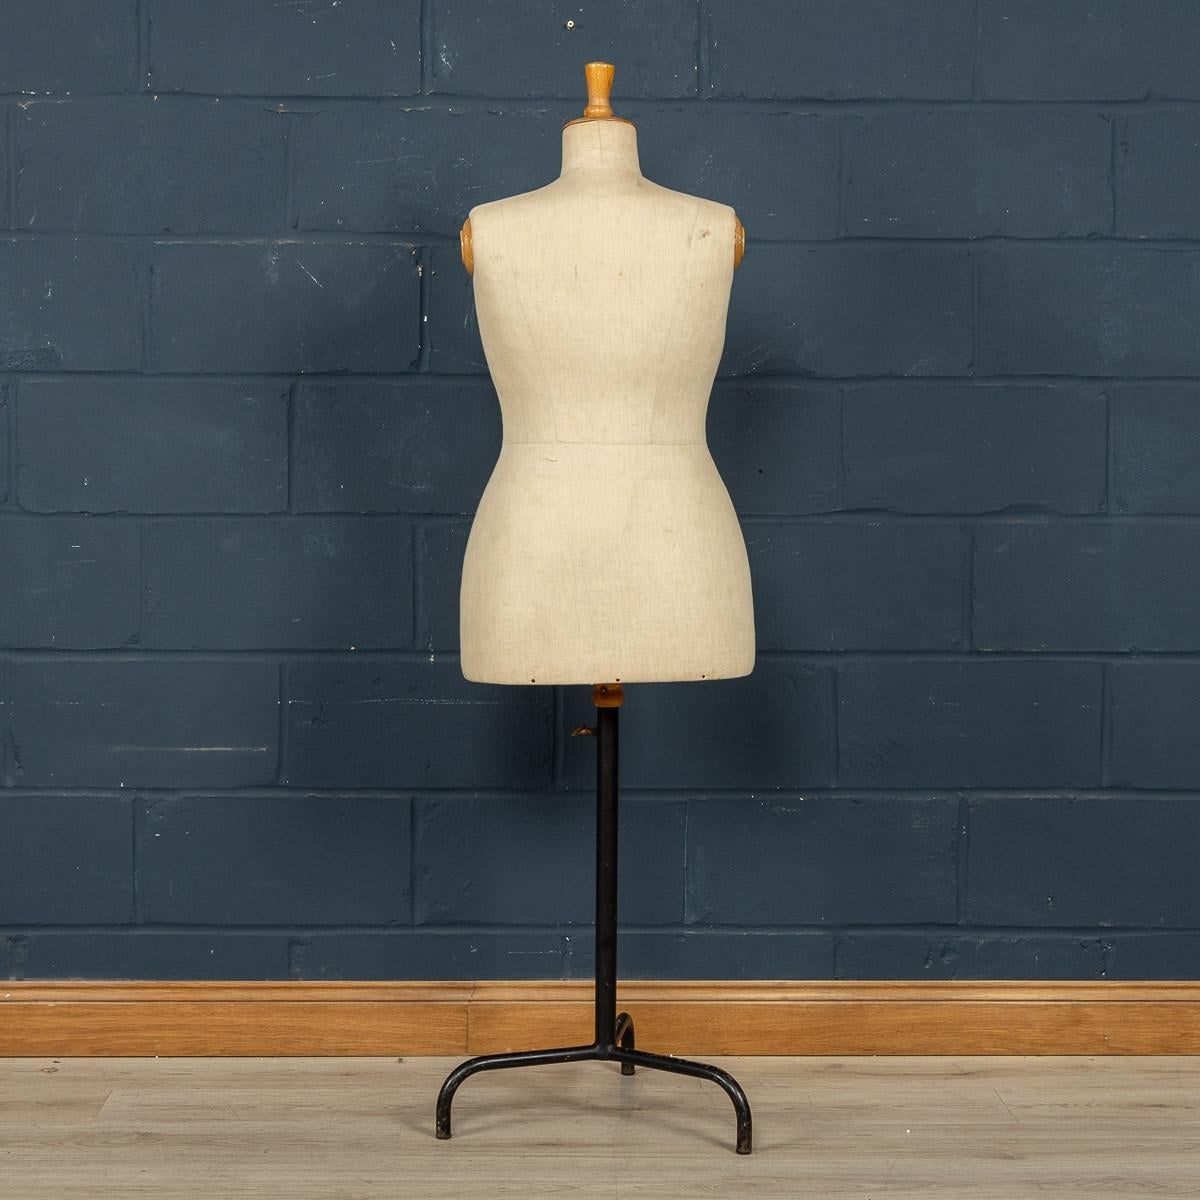 20th Century French Shop Mannequin By Buste Girard, c.1920 For Sale 2